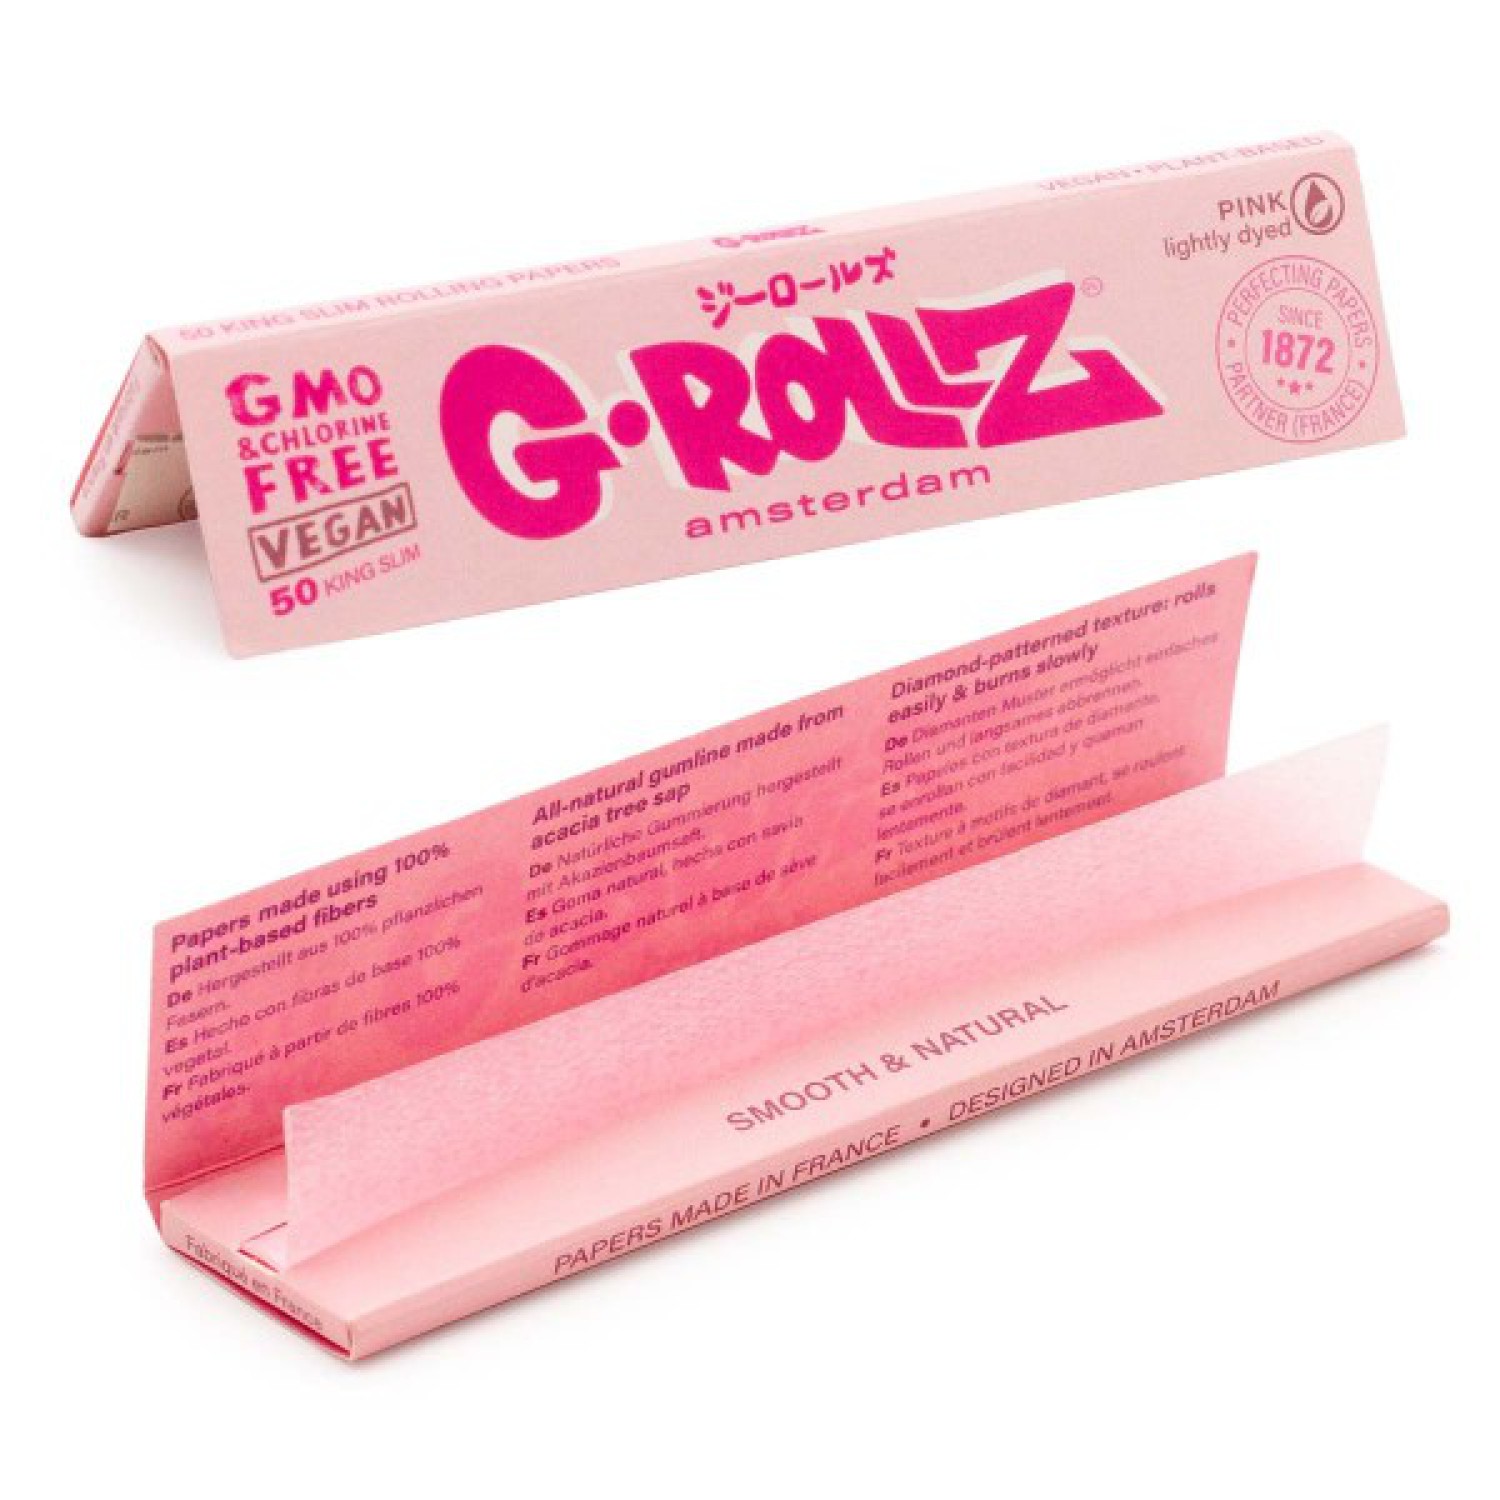 G-ROLLZ | Lightly Dyed Pink - 50 KS Papers (50 Booklets Display)